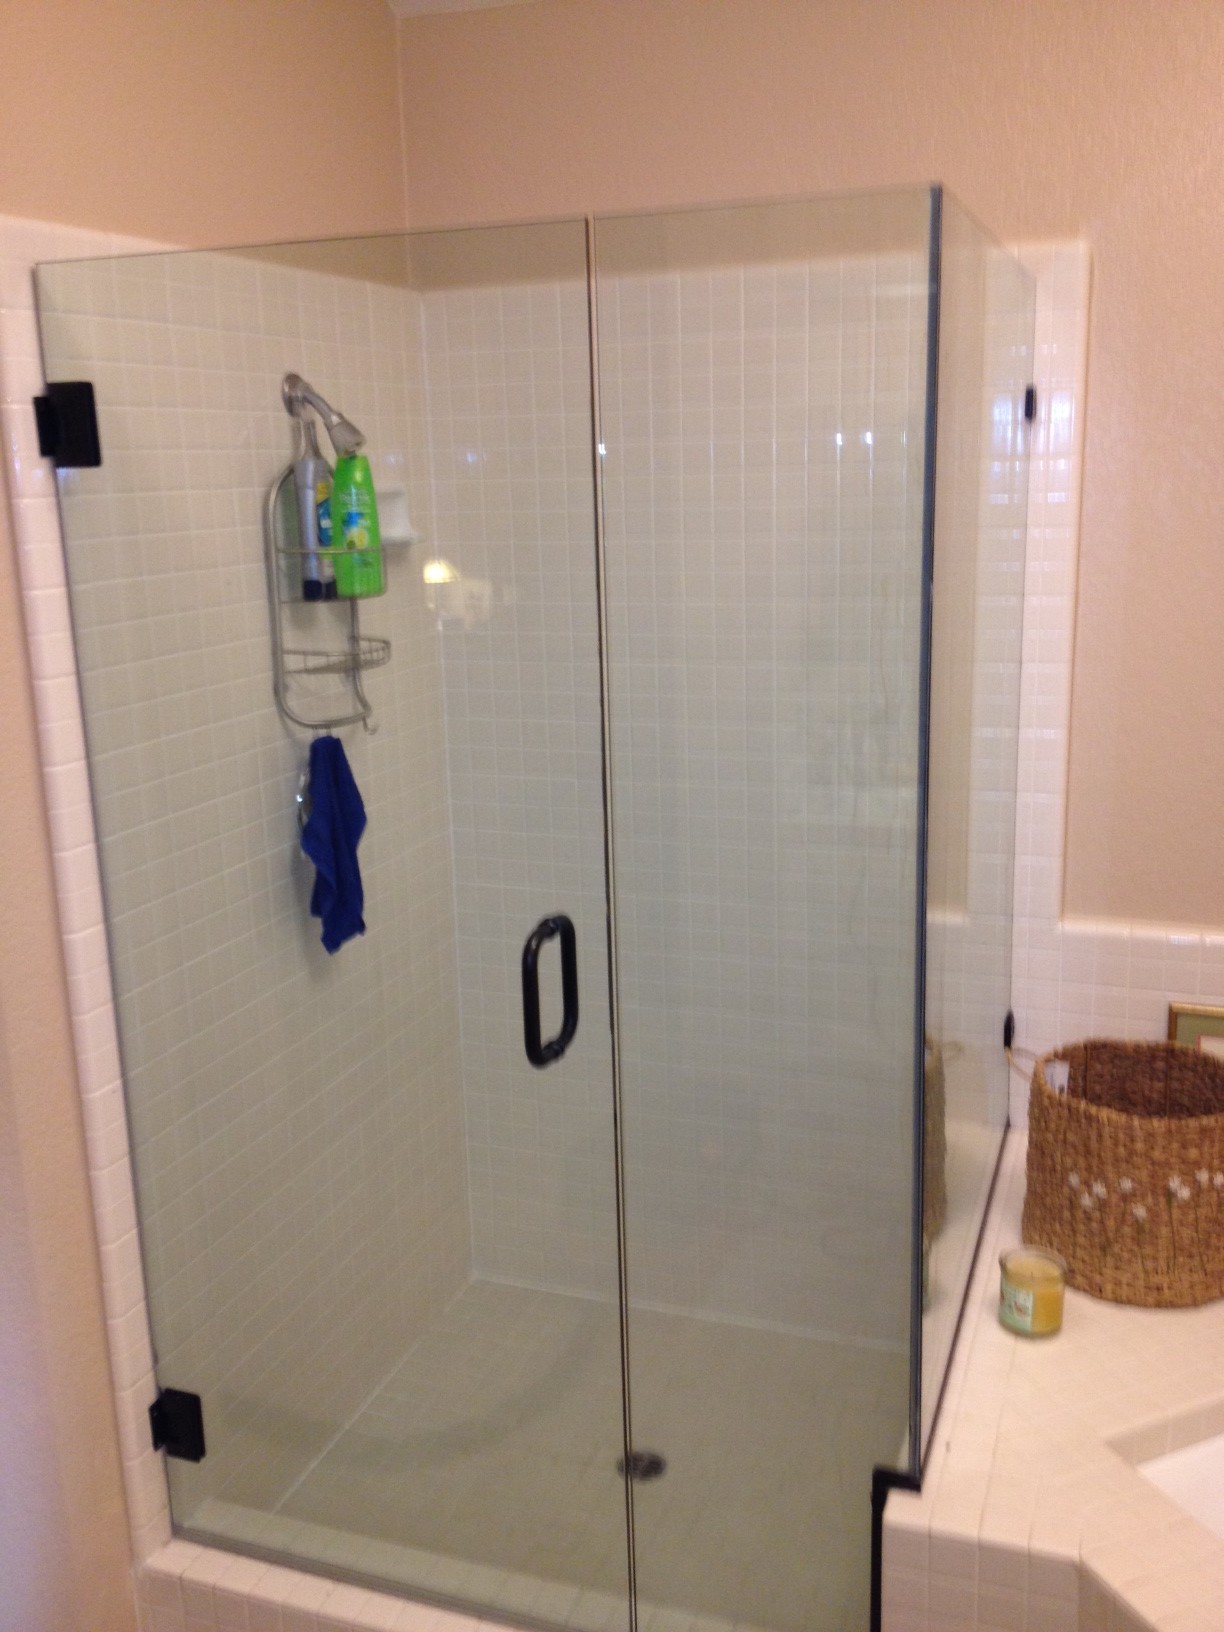 Shower Door Replacement by OnTrack. Larger door, updated hardware, easy accessibility.